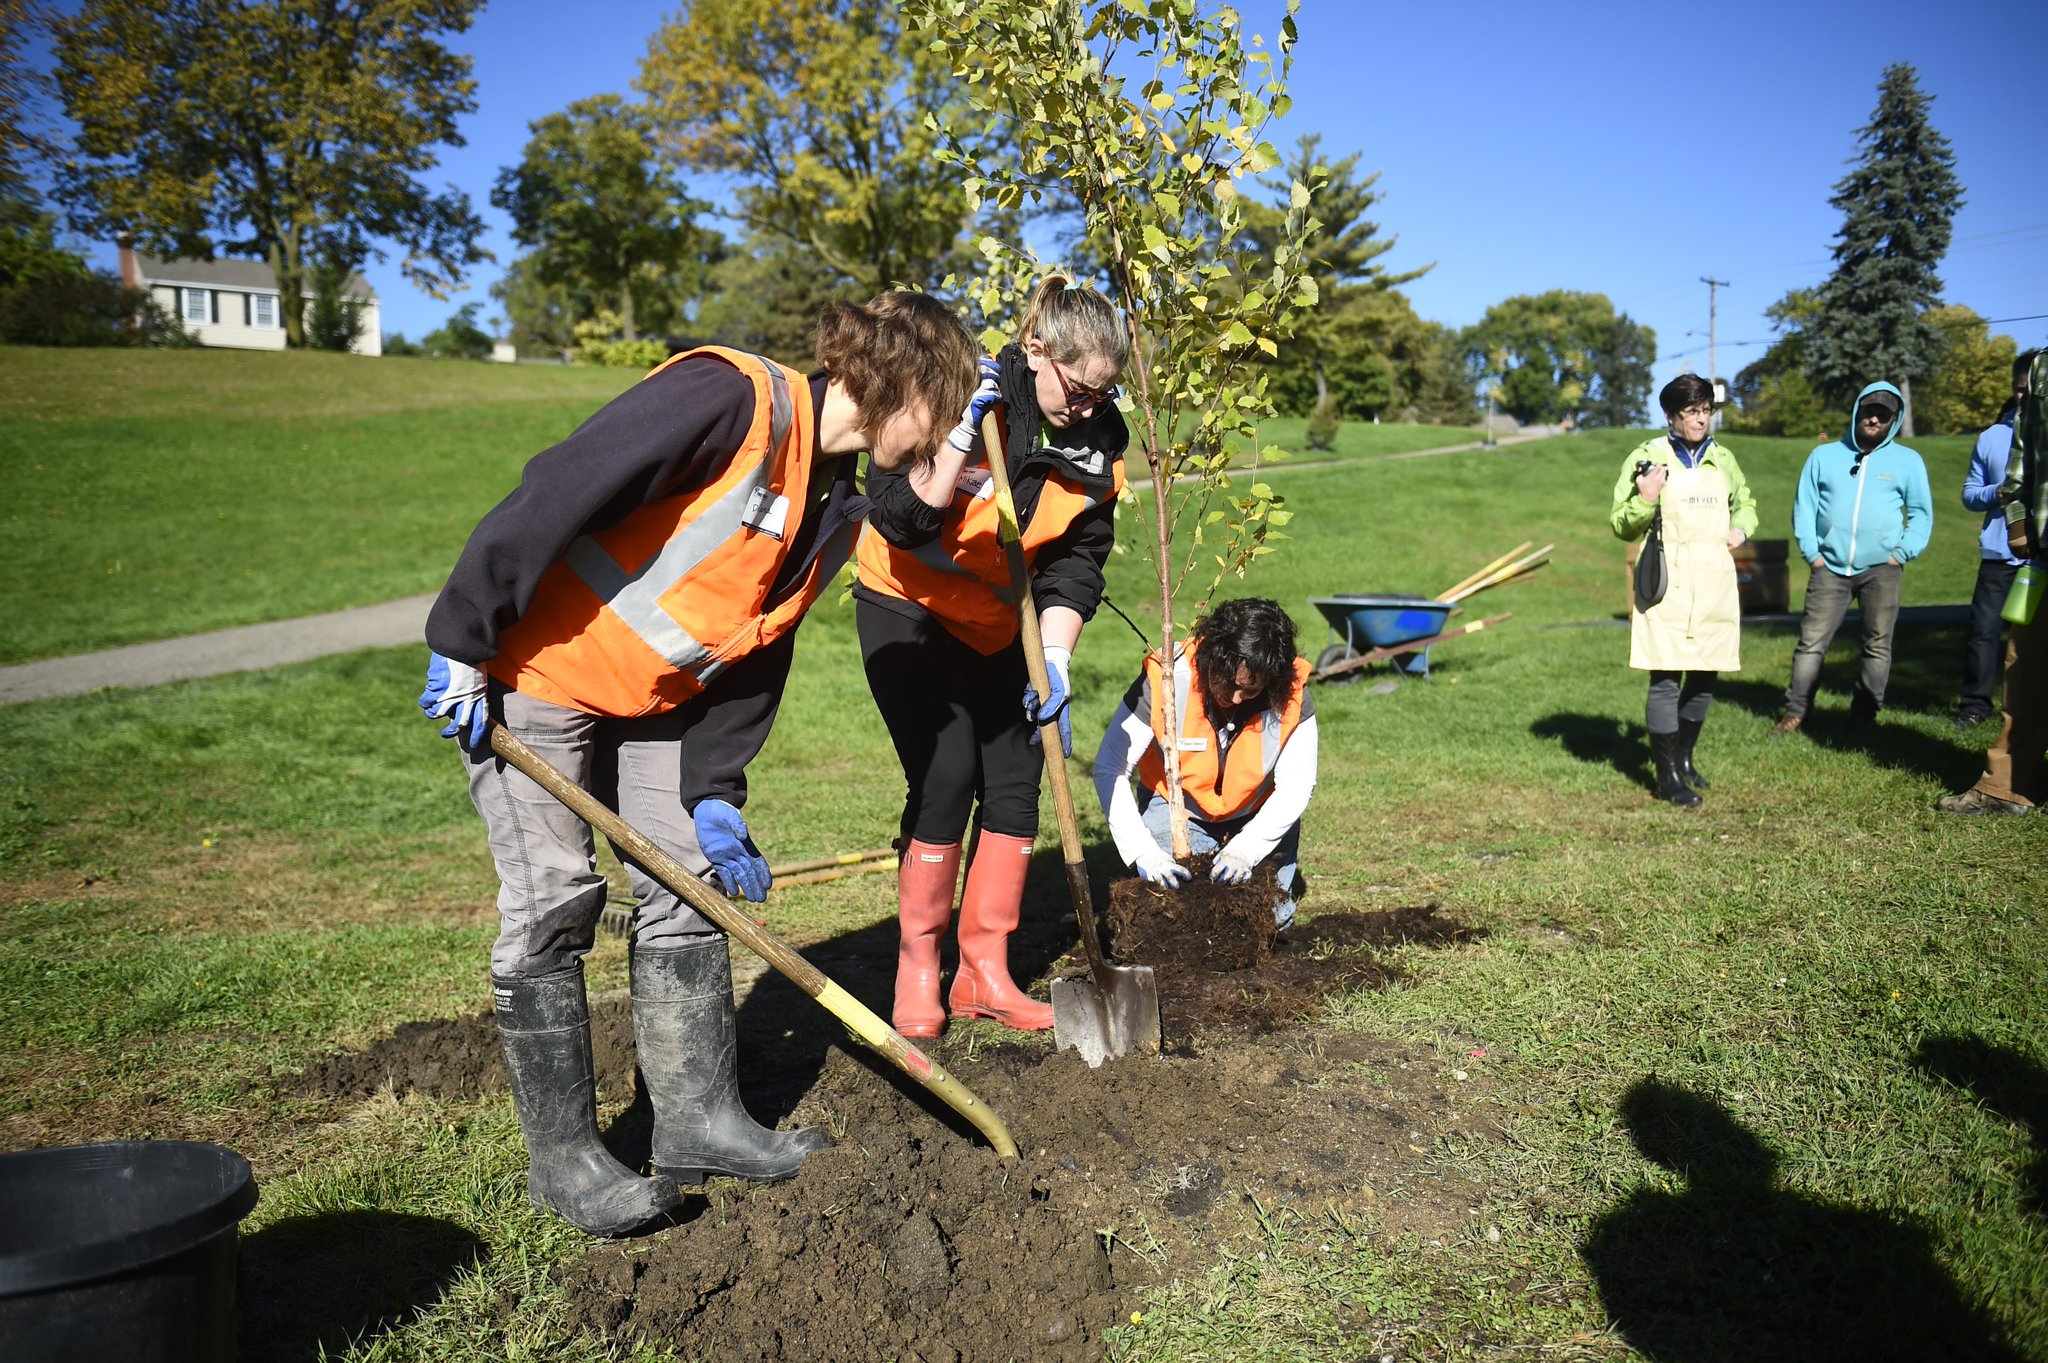 Lee & Associates Pledges to Plant a Tree for Every Deal with the Arbor